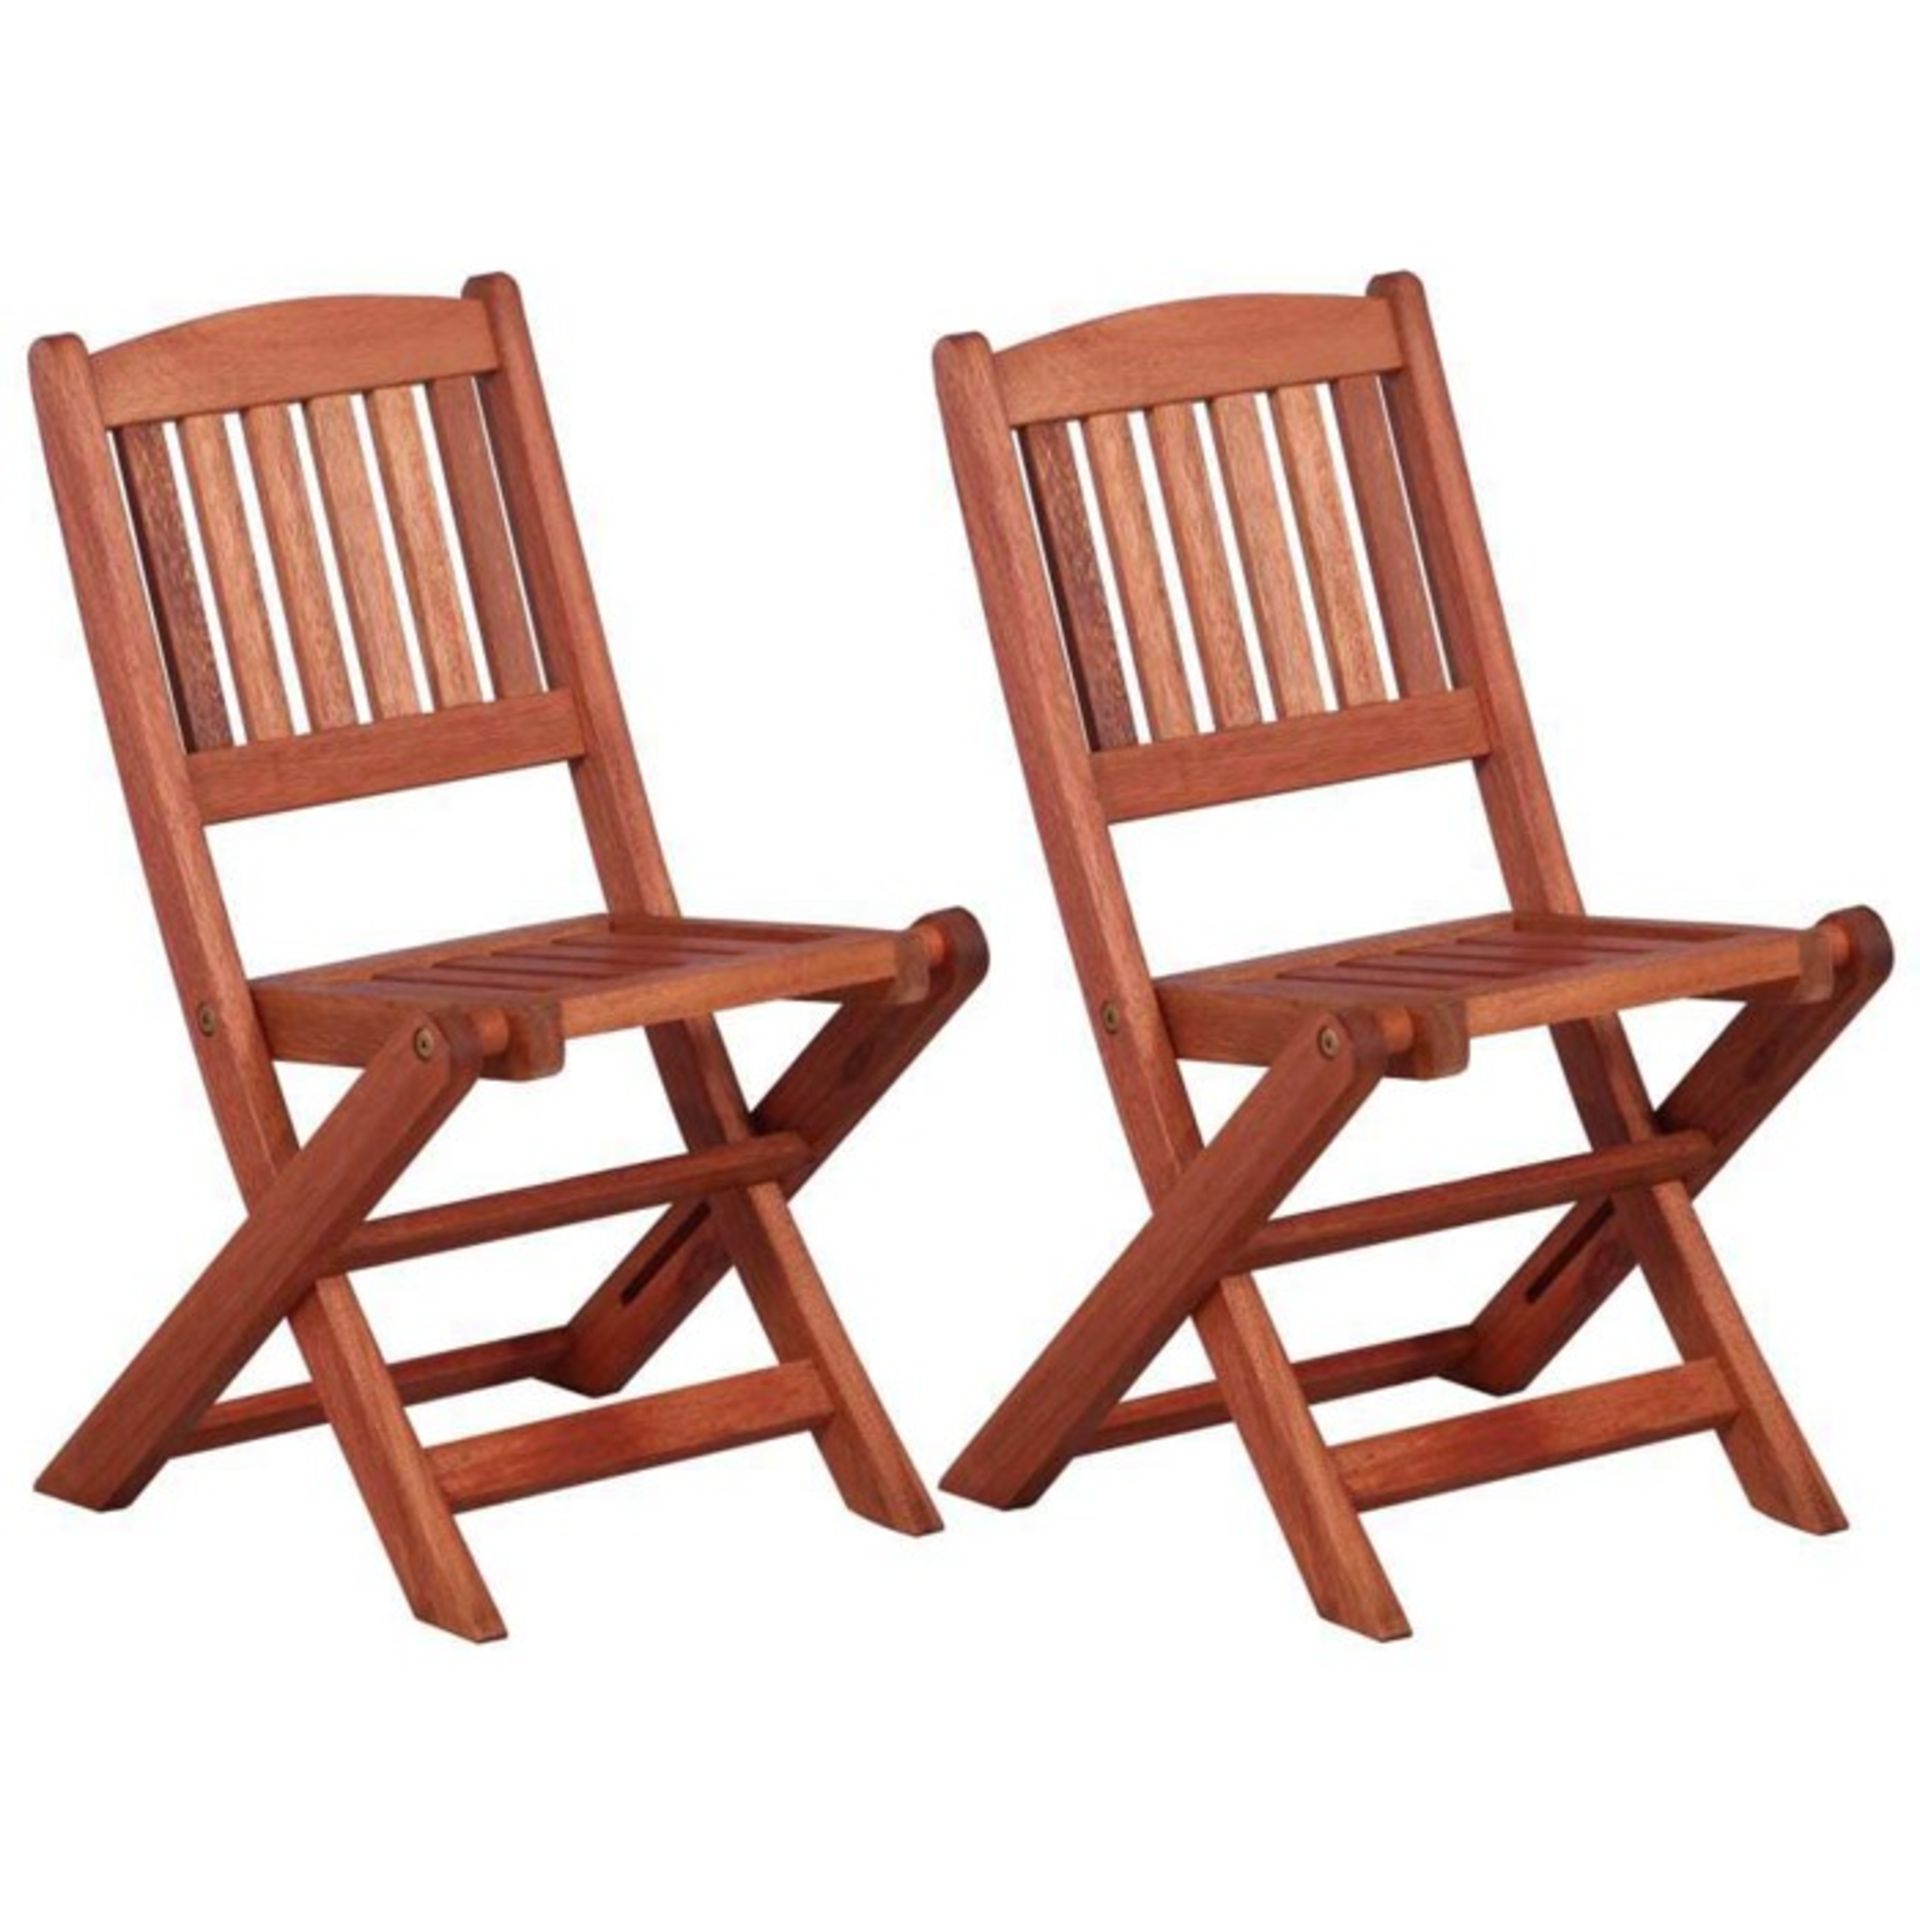 BRAND NEW JOHN LEWIS SET OF 2 WOODEN GARDEN CHAIRS. RRP £148.50. This pair of Venice garden dining - Image 2 of 2